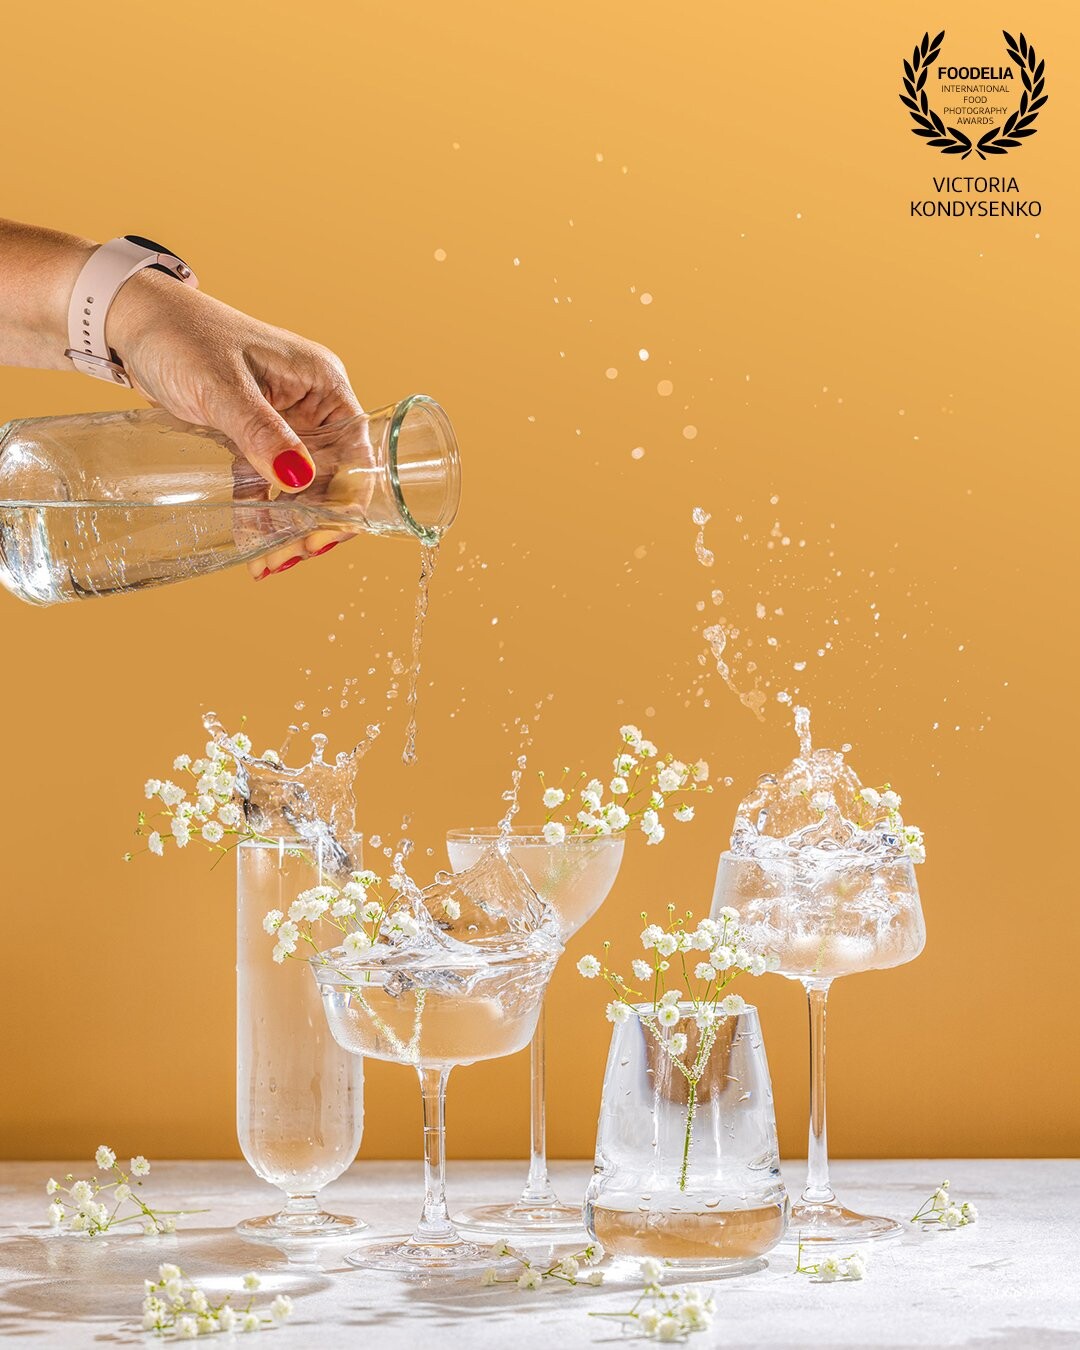 Various elegant champagne glasses with sparkling water, women hand pouring water from a bottle into a coupe glass. Splash, splash, fly flowers with water drops on peach color background